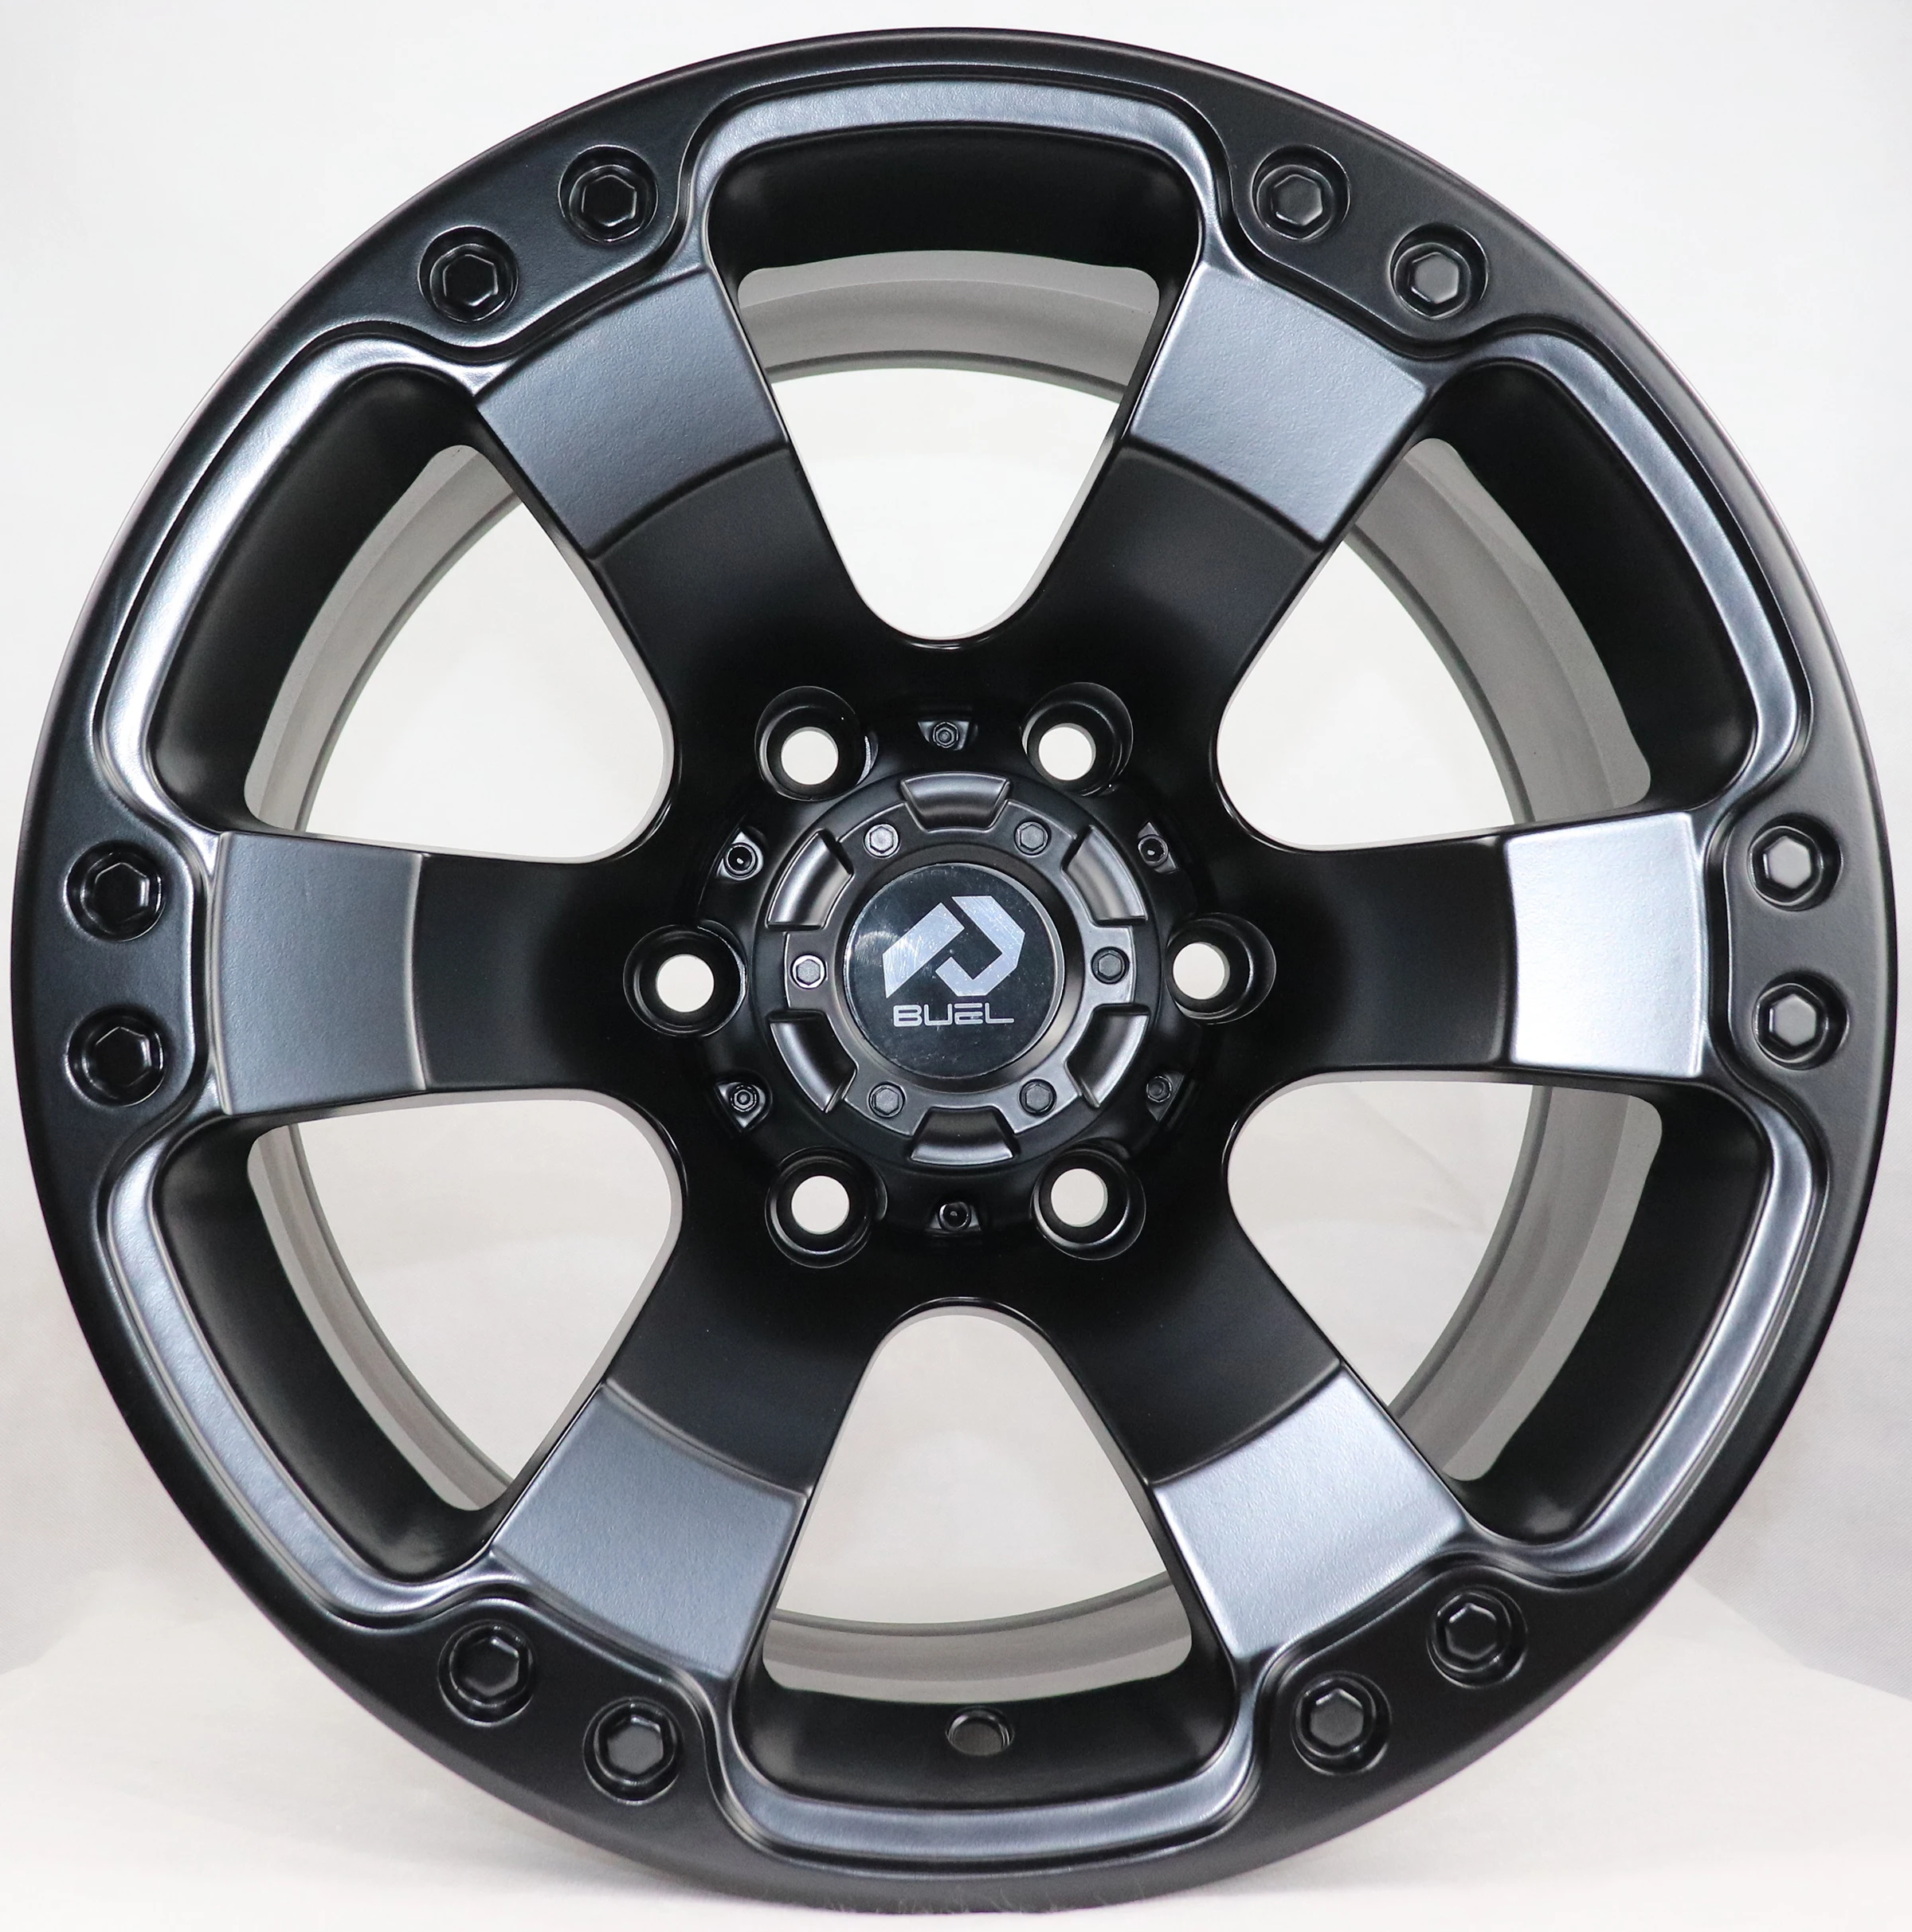 

16 inch SUV Aftermarket Off Road wheel Alloy Car Rims 6 Lugs 6 Holes 6x139.7 PCD 4x4 Offroad Wheels